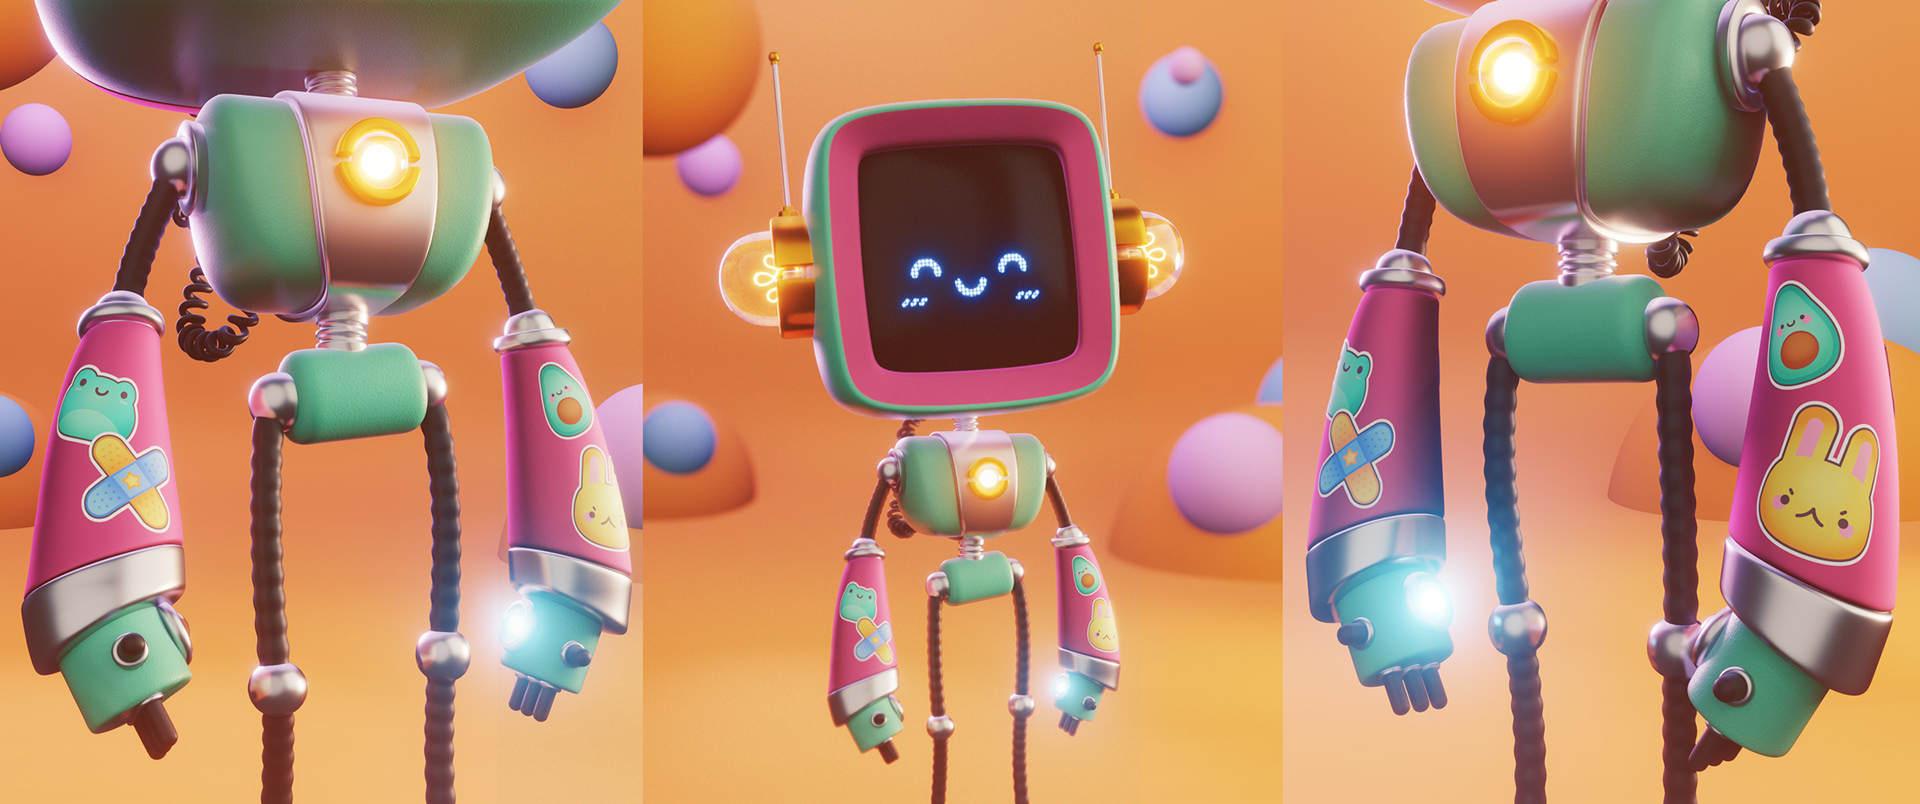 3D cartoon character Robot with cute stickers with animals, modeled and  rendered in Blender Eevee | Behance